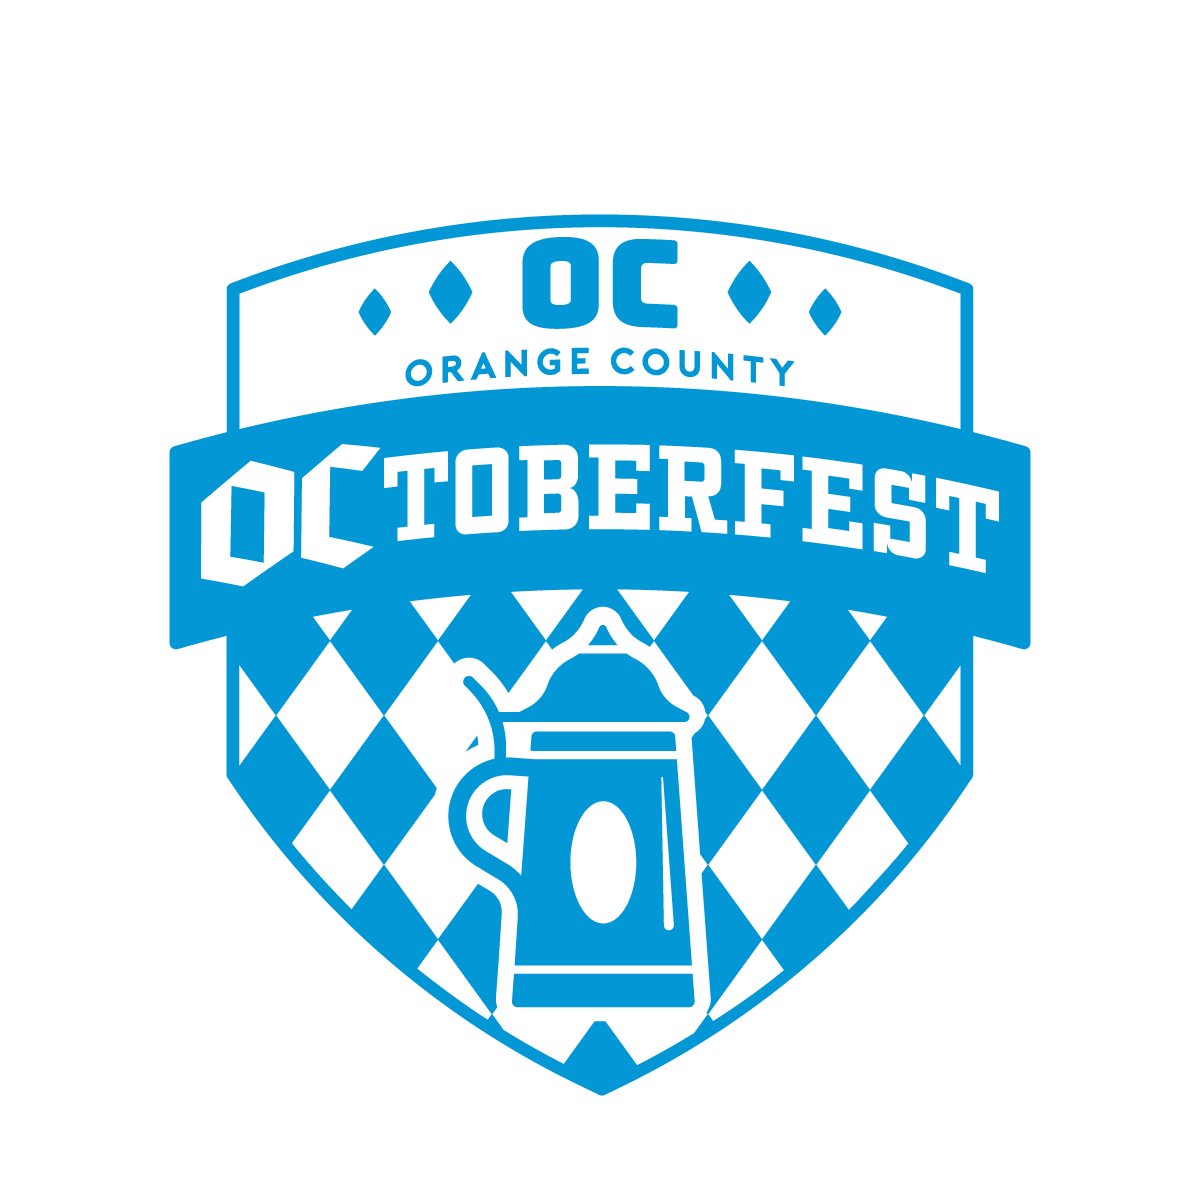 Join us for authentic food, Bavarian beer, and entertainment every weekend from Sept 29 - Oct 21 at Newport Dunes for the OC's largest Oktoberfest party.